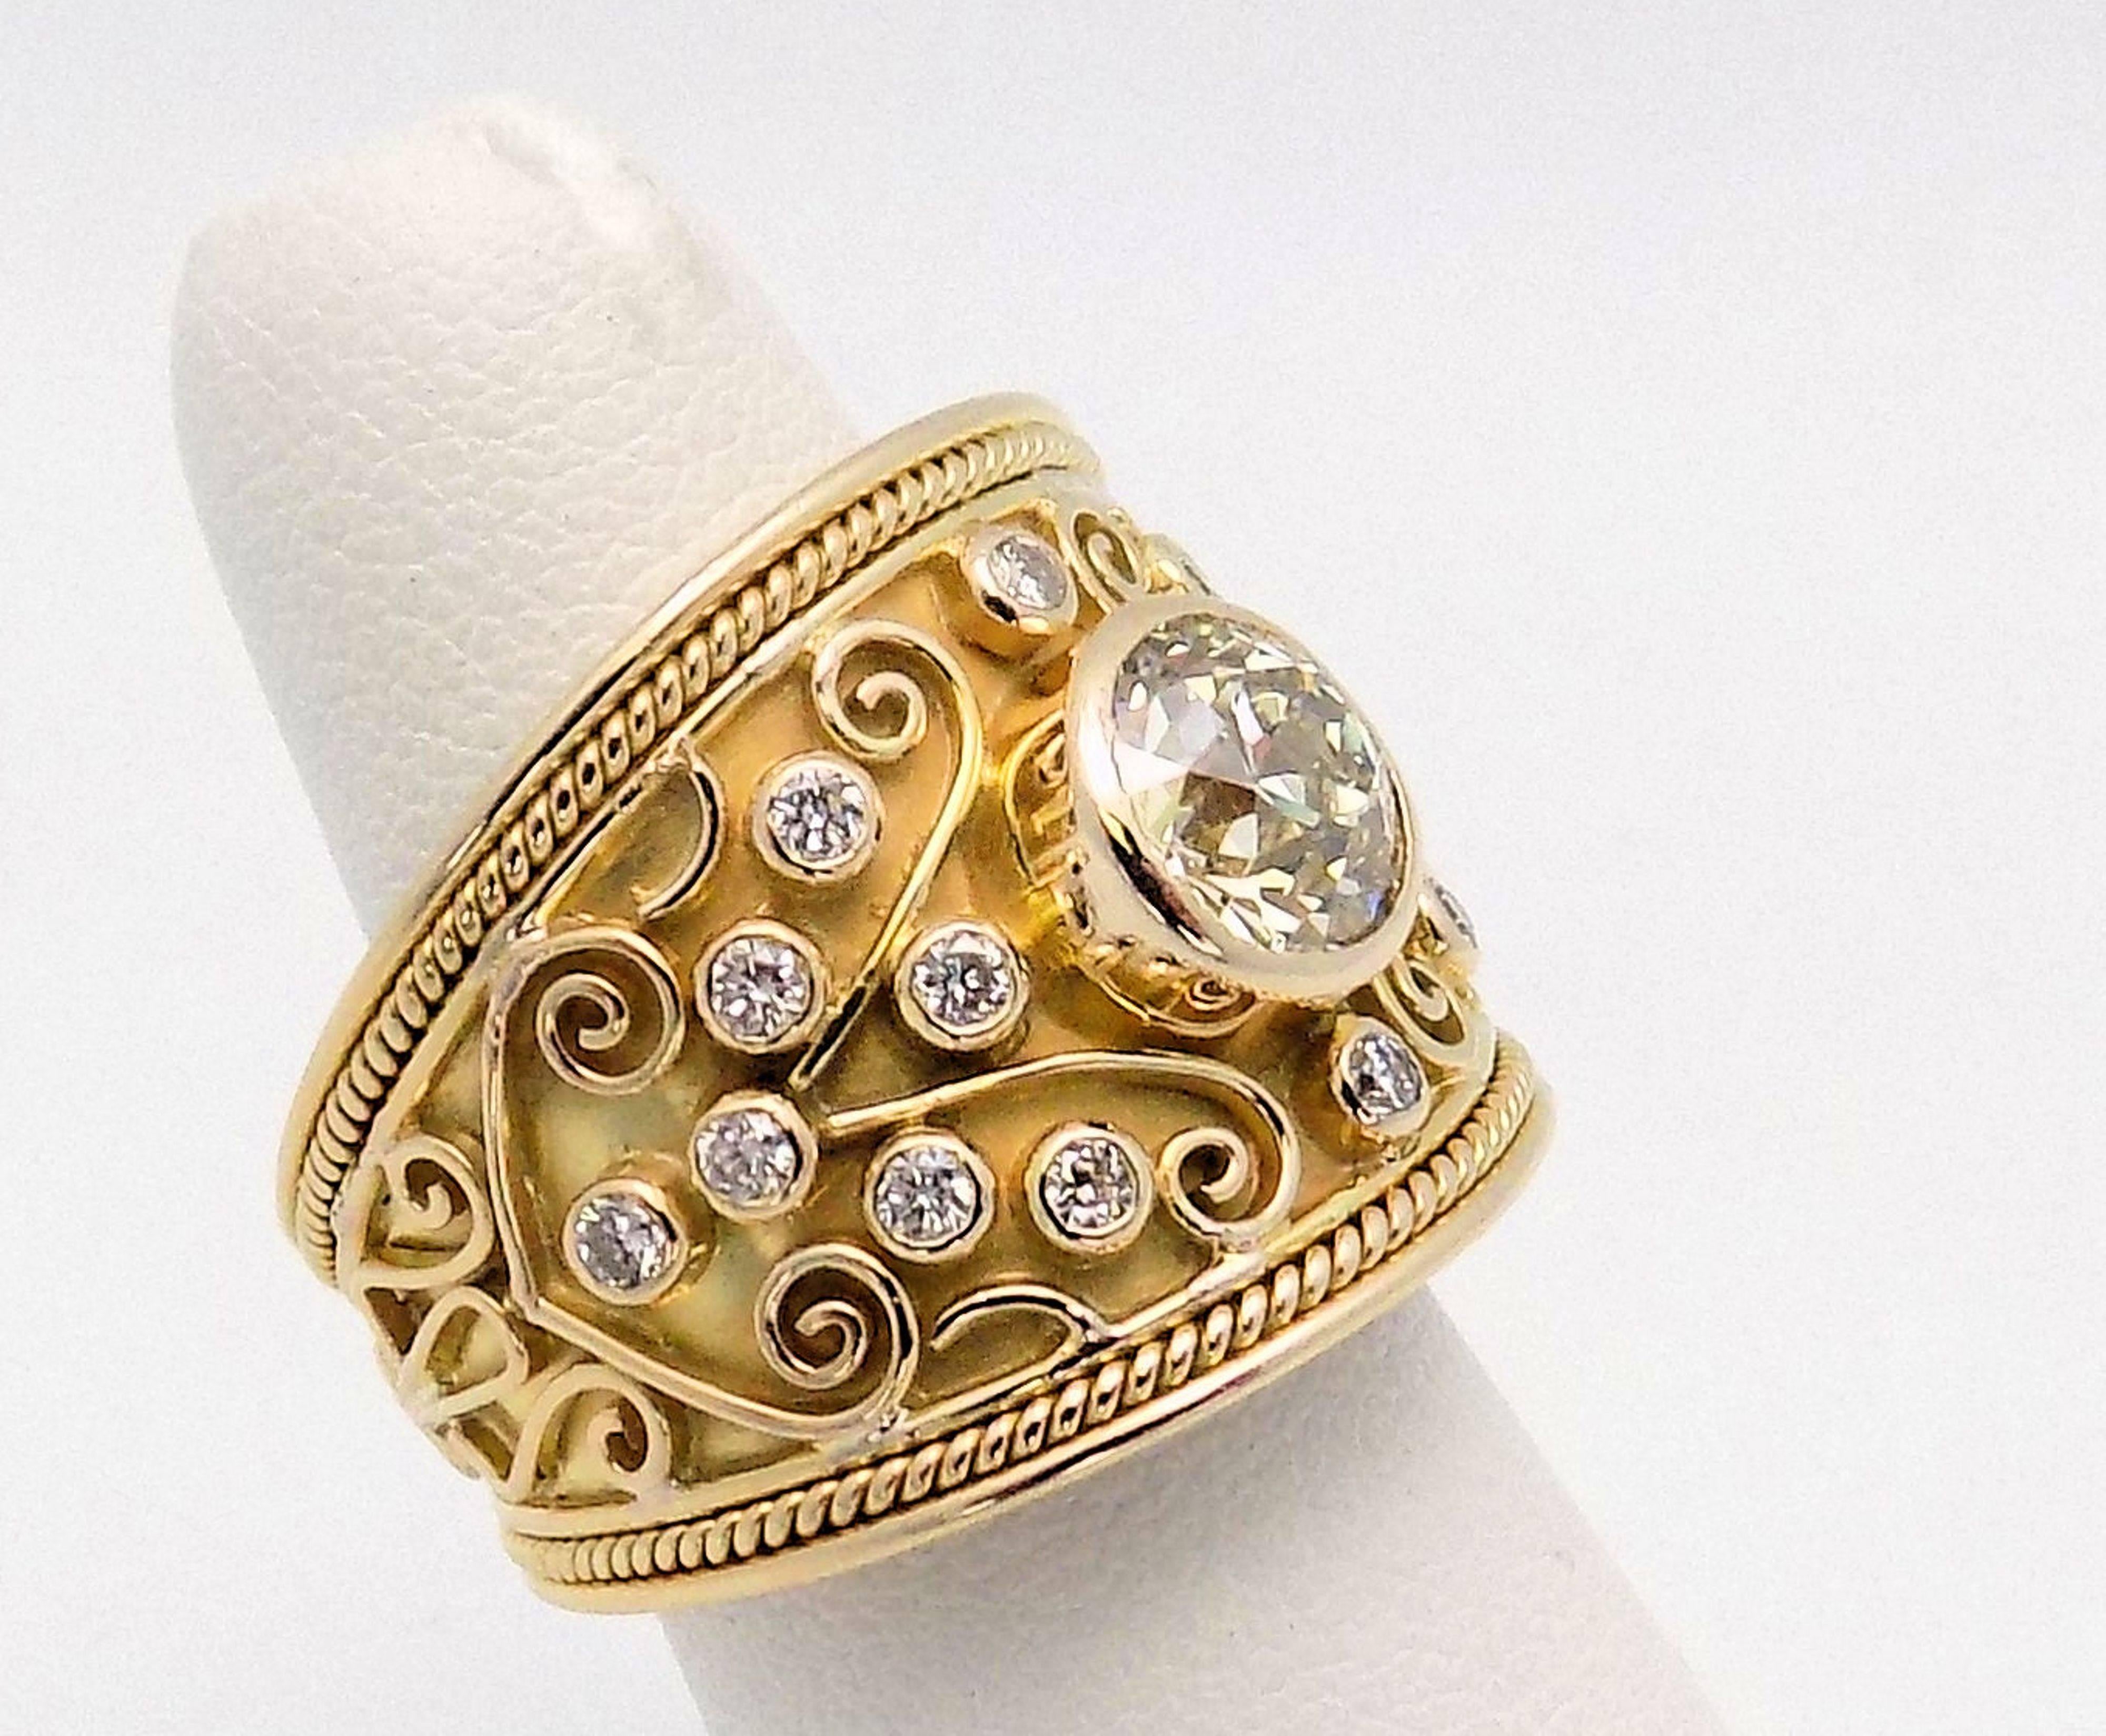 14 Karat Yellow Gold Tapered Band 1 European Cut Diamond Approximately 2.00 Carat VS-2, K-L, 14 Round Brilliant Diamonds 0.48 Carat Total Weight SI, H-I. Finger Size 9; 12.2 DWT or 18.97 Grams.